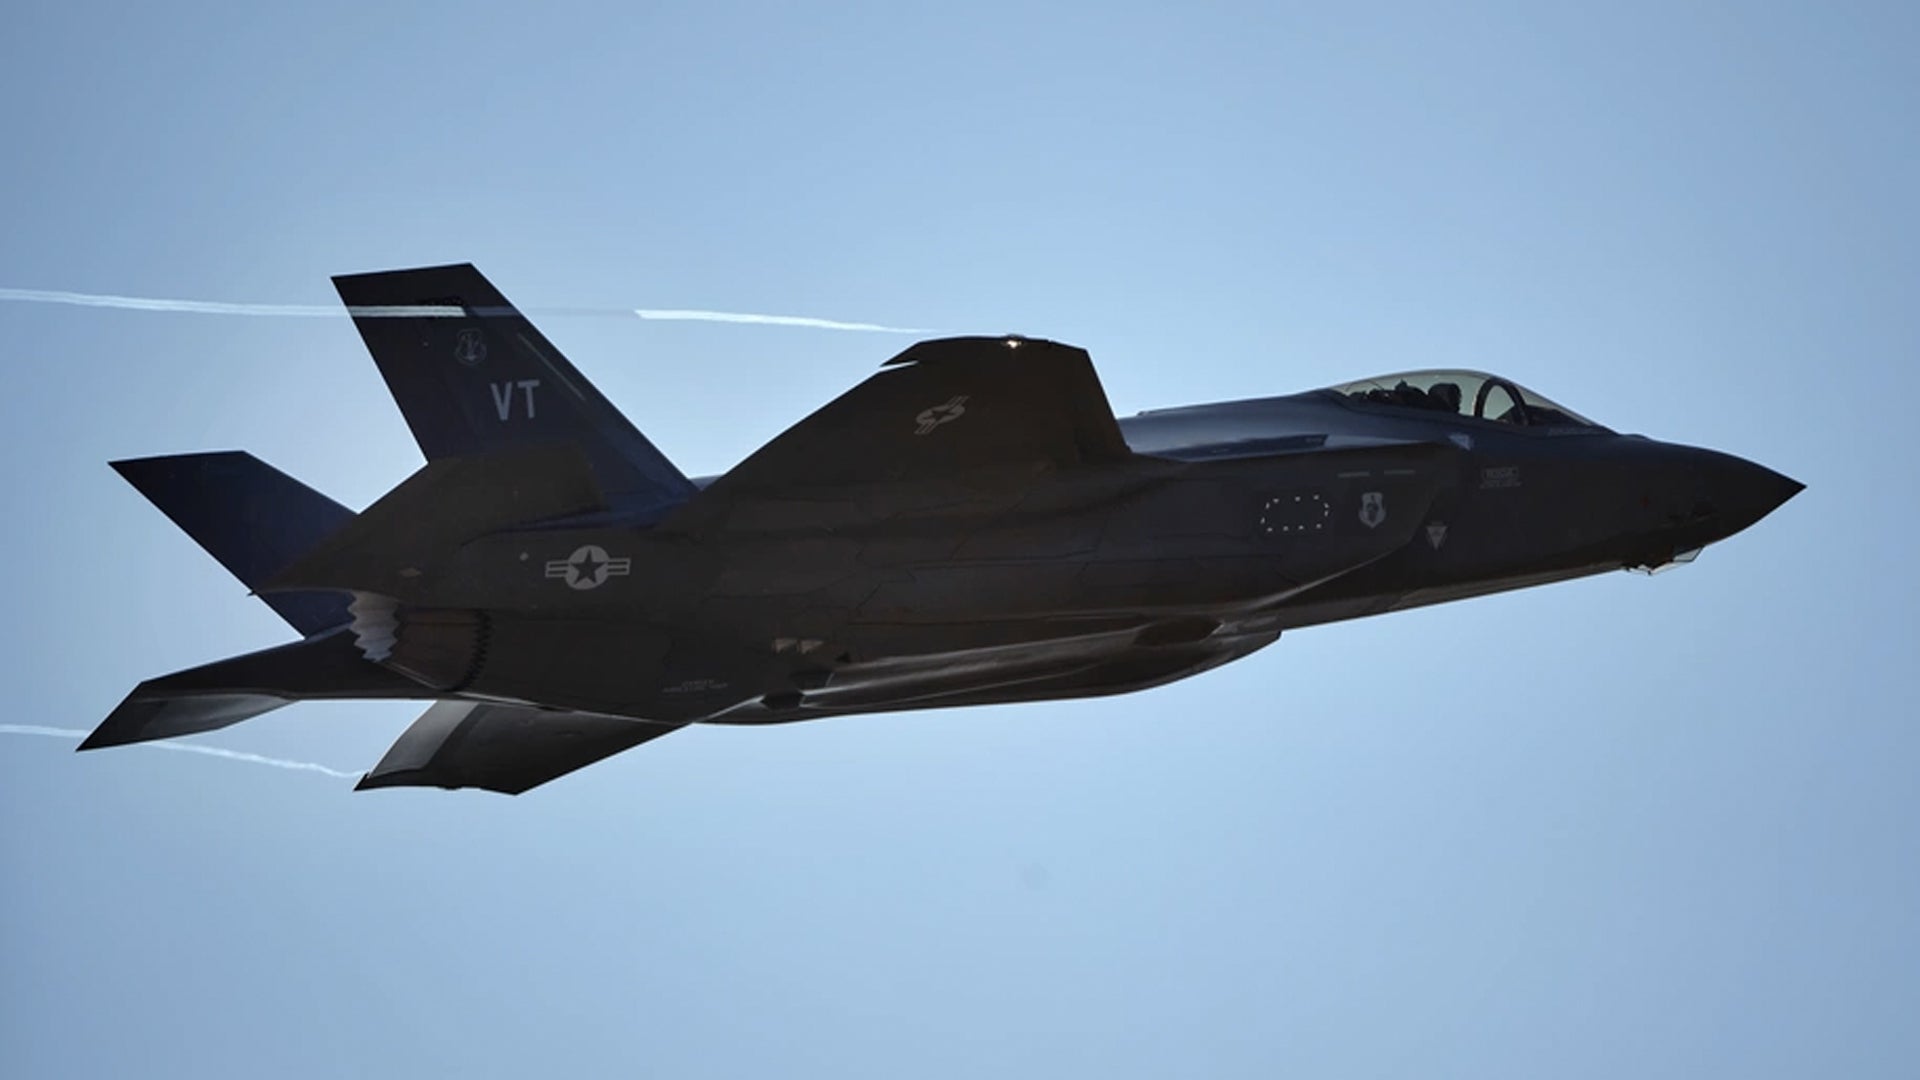 Col. David Shevchik, Jr., commander of the 158th Fighter Wing, Air National Guard, flies the wing's final F-35A Lightning II to the South Burlington Air National Guard Base during a ceremony marking the arrival, South Burlington, Vt., Oct. 14, 2020. The aircraft is the 20th and final to be assigned to the wing since taking delivery of the first two in Sept. of 2019. (Tech. Sgt. Ryan Campbell/U.S. Air Force)